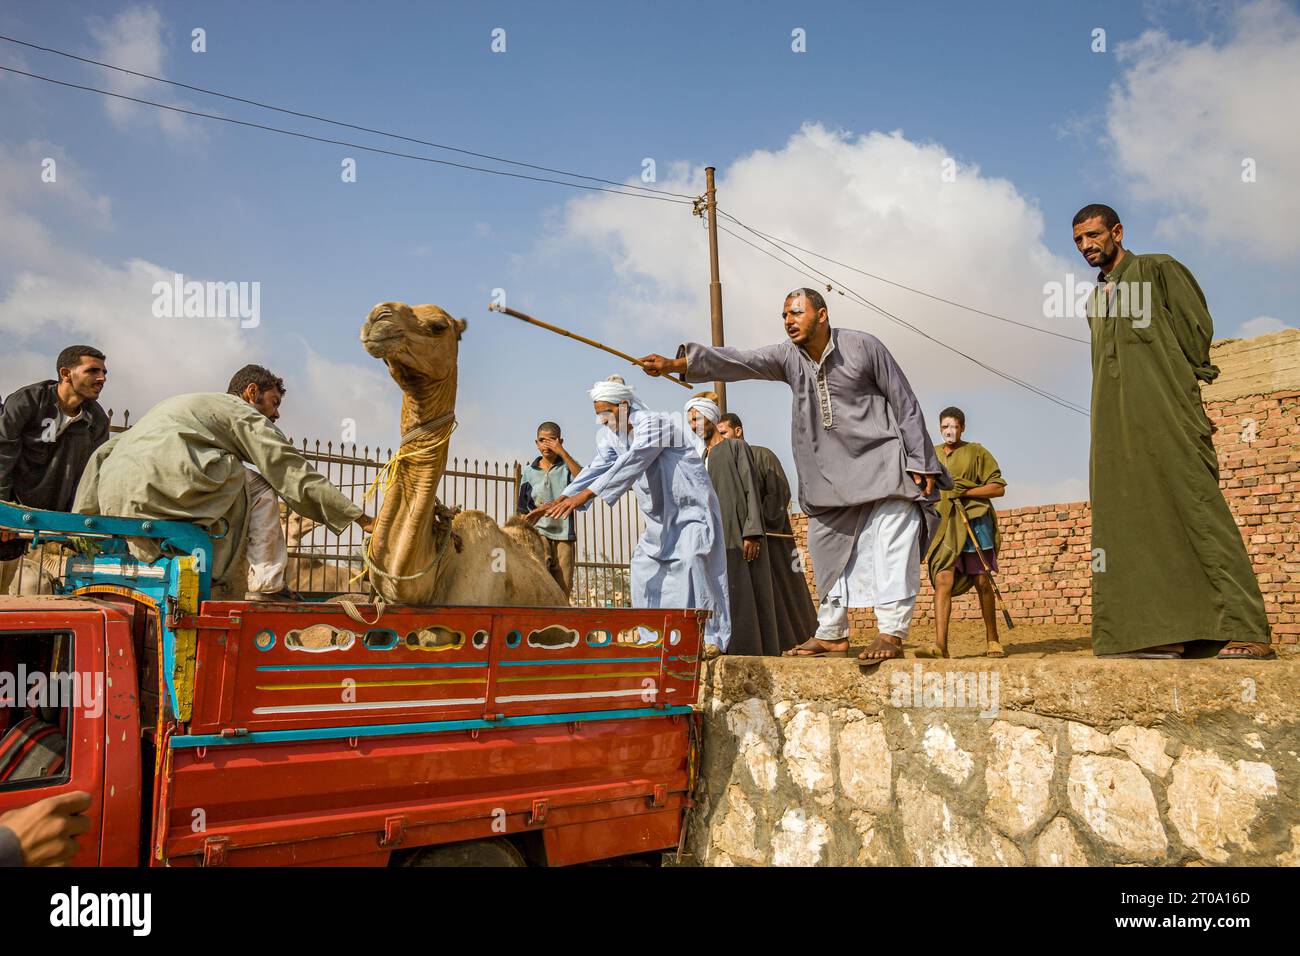 Egypt, Cairo, Birqash, Camel Market - To tie a camel in a van is no easy task Stock Photo